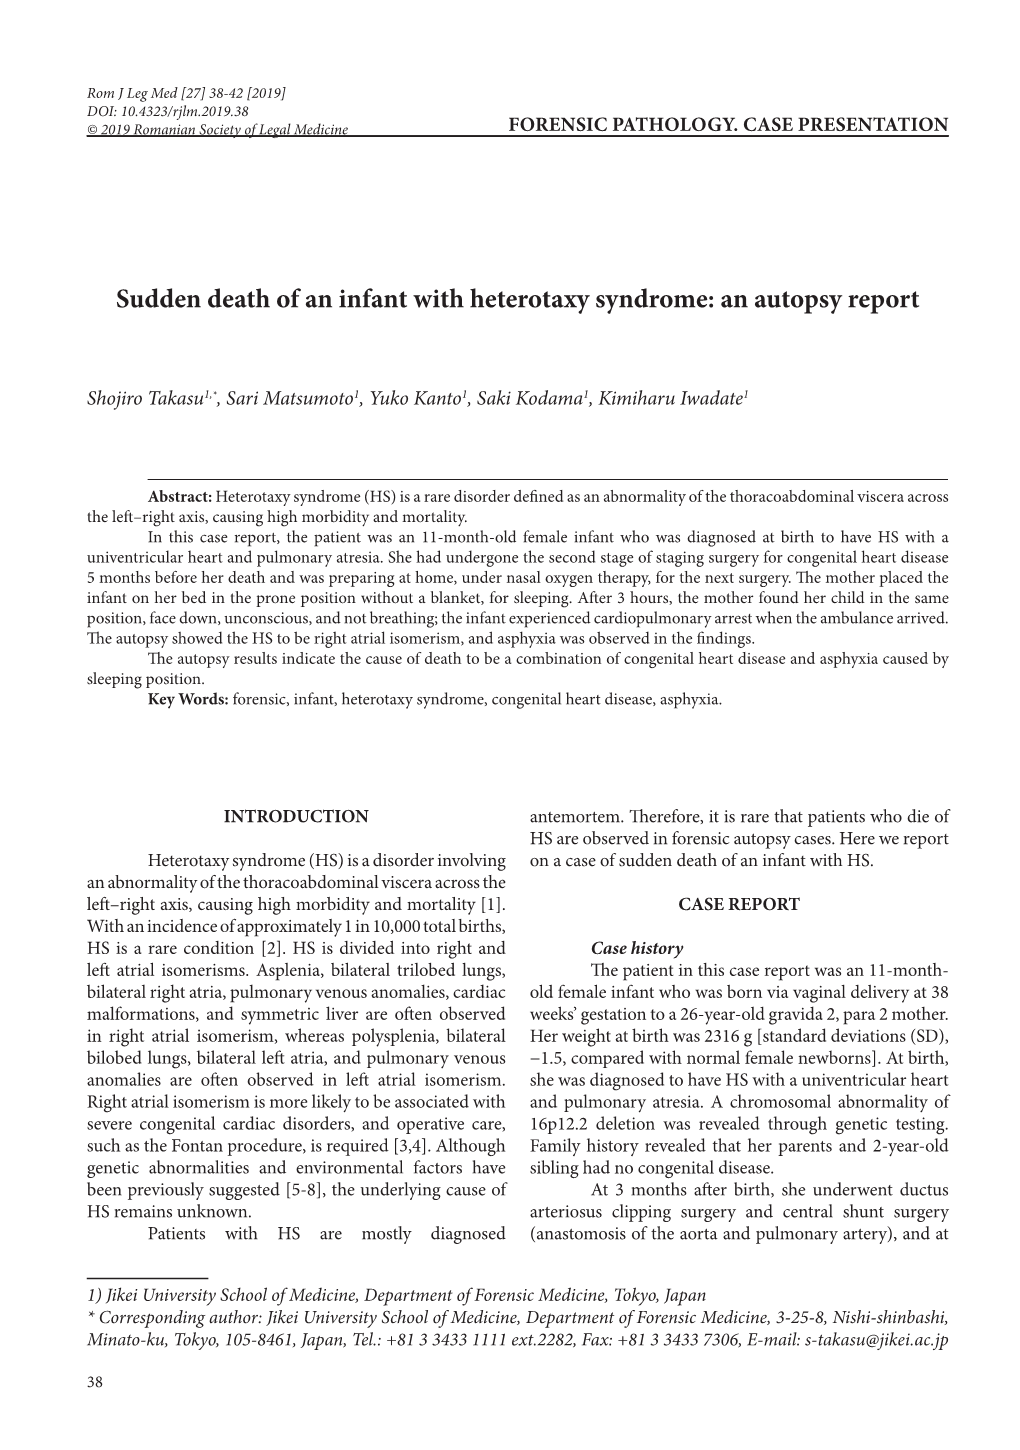 Sudden Death of an Infant with Heterotaxy Syndrome: an Autopsy Report